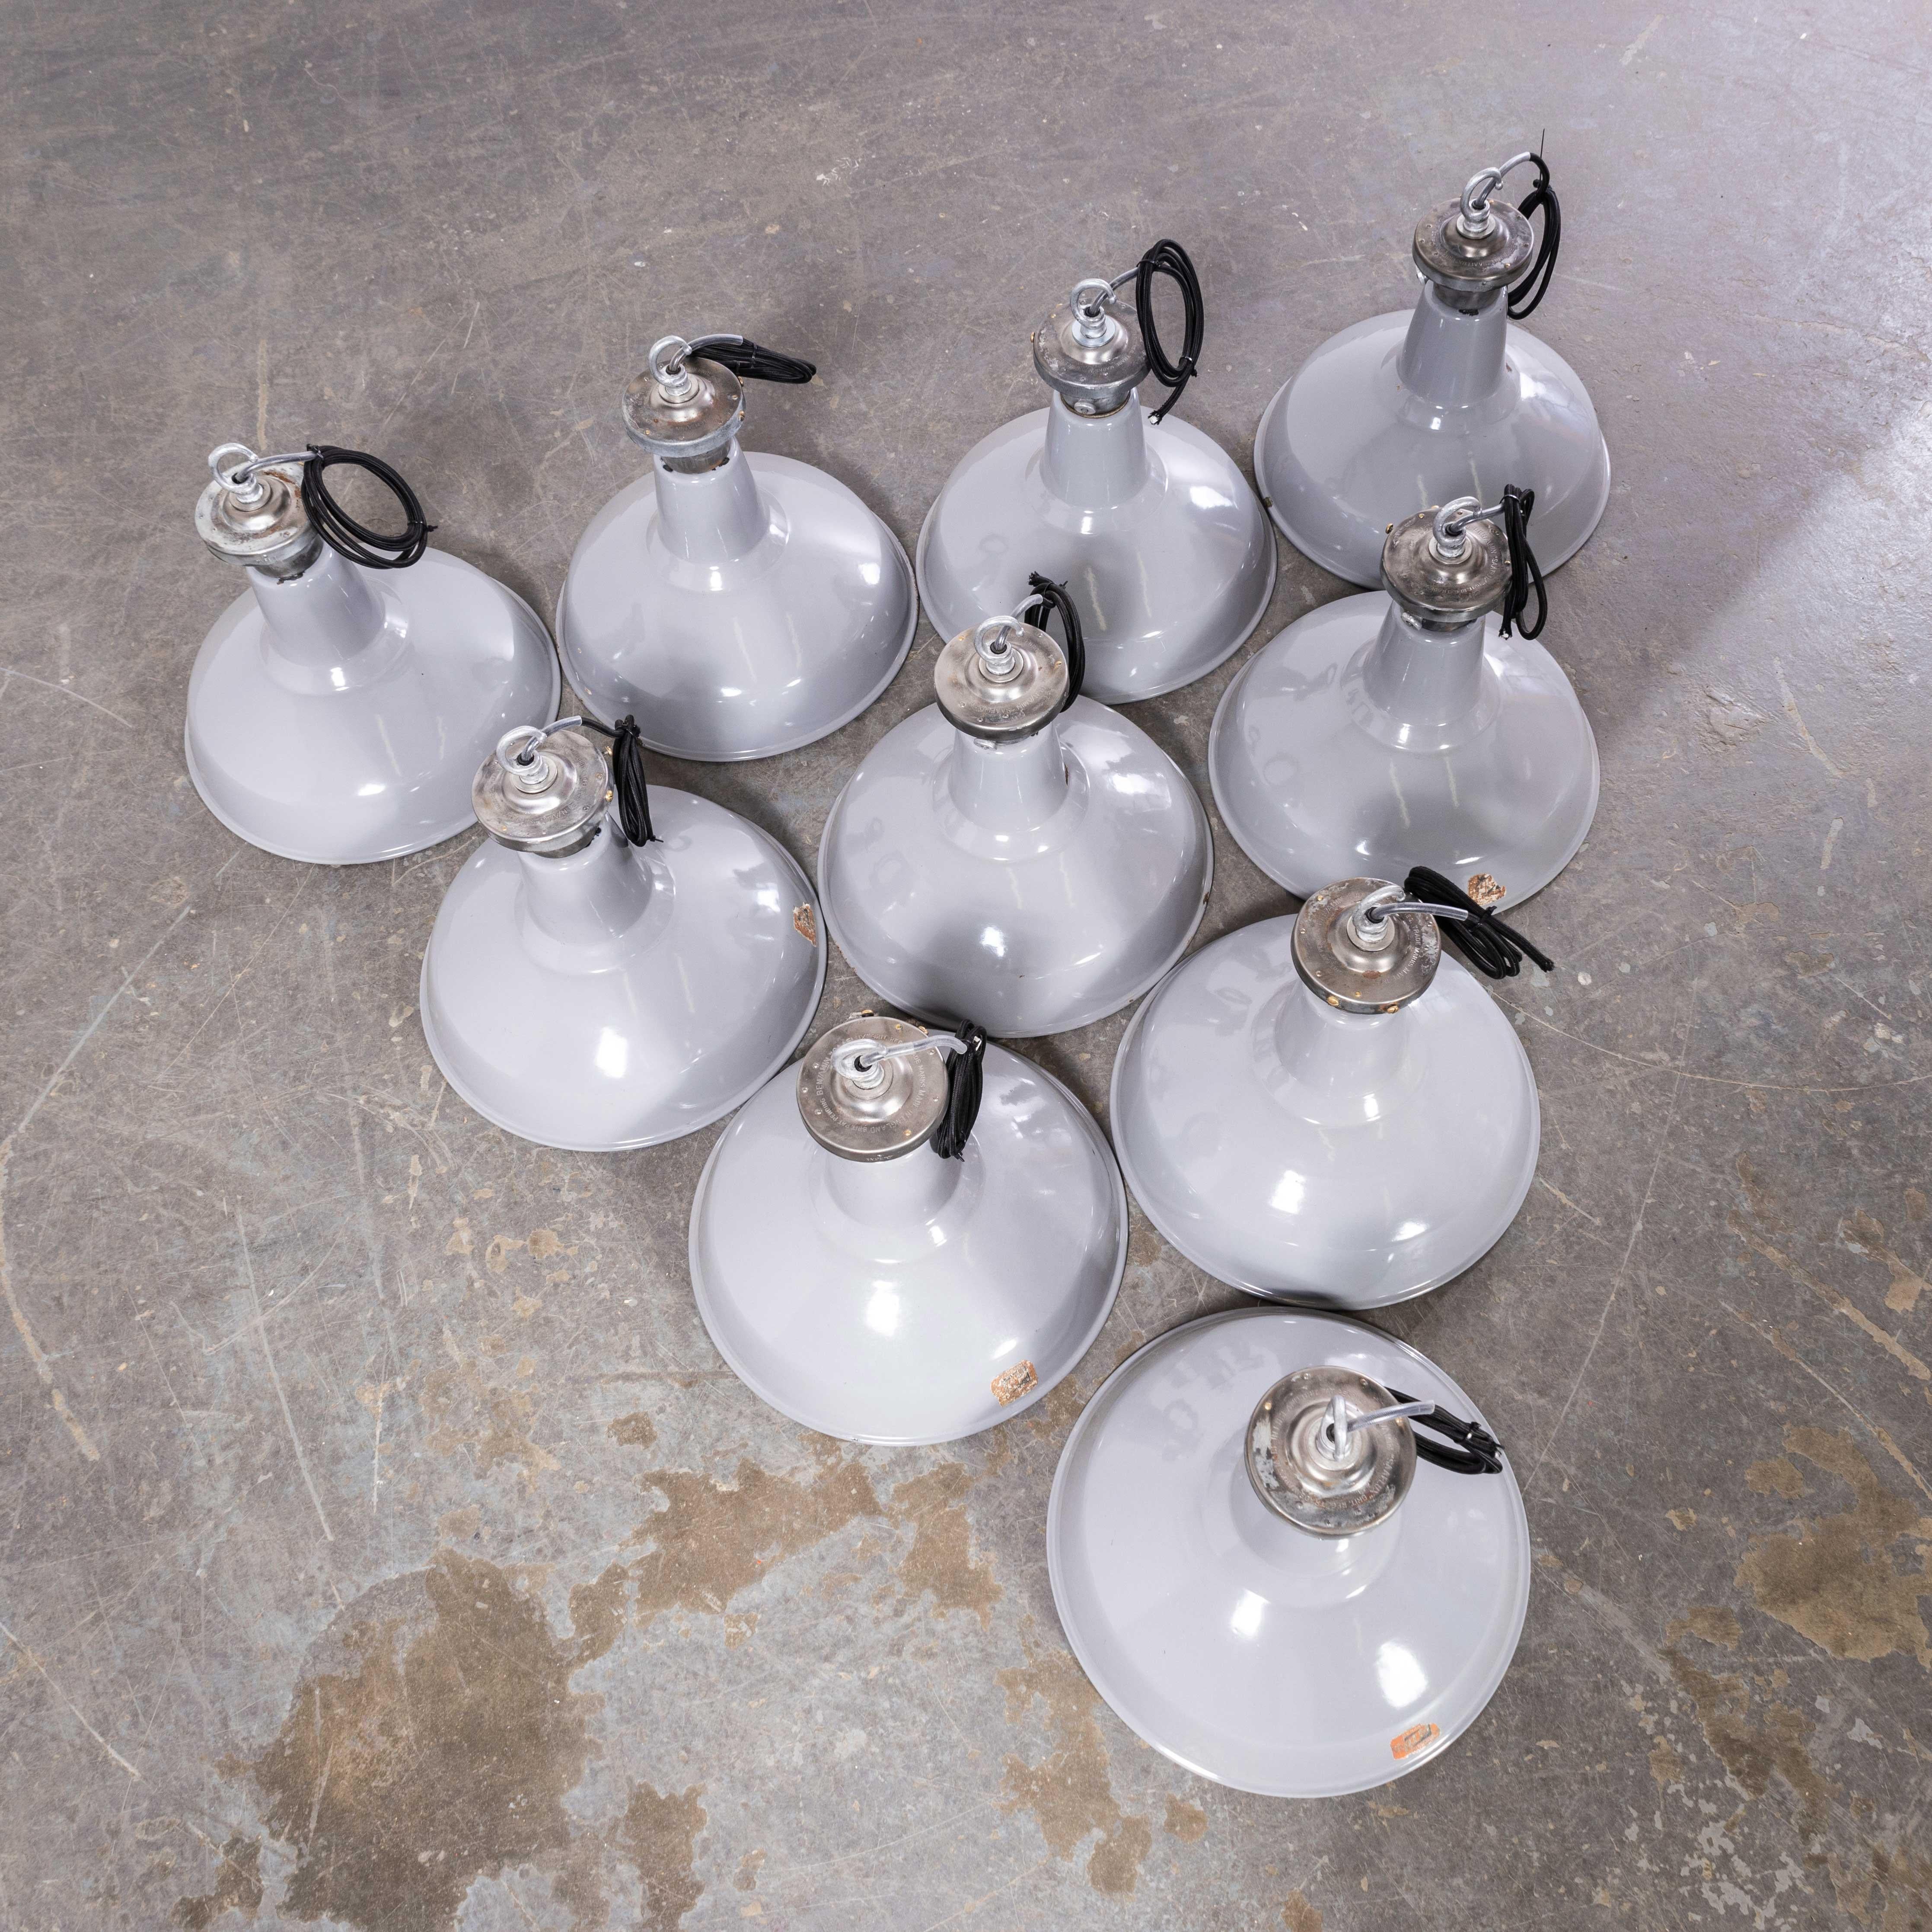 1950’s Industrial Grey Benjamin Enamelled Pendant Lamps – 16 Inch
1950’s Industrial Grey Benjamin Enamelled Pendant Lamps. Listing is for one lamp, several available. Benjamin was arguably the market leader in industrial lighting in the 1930’s